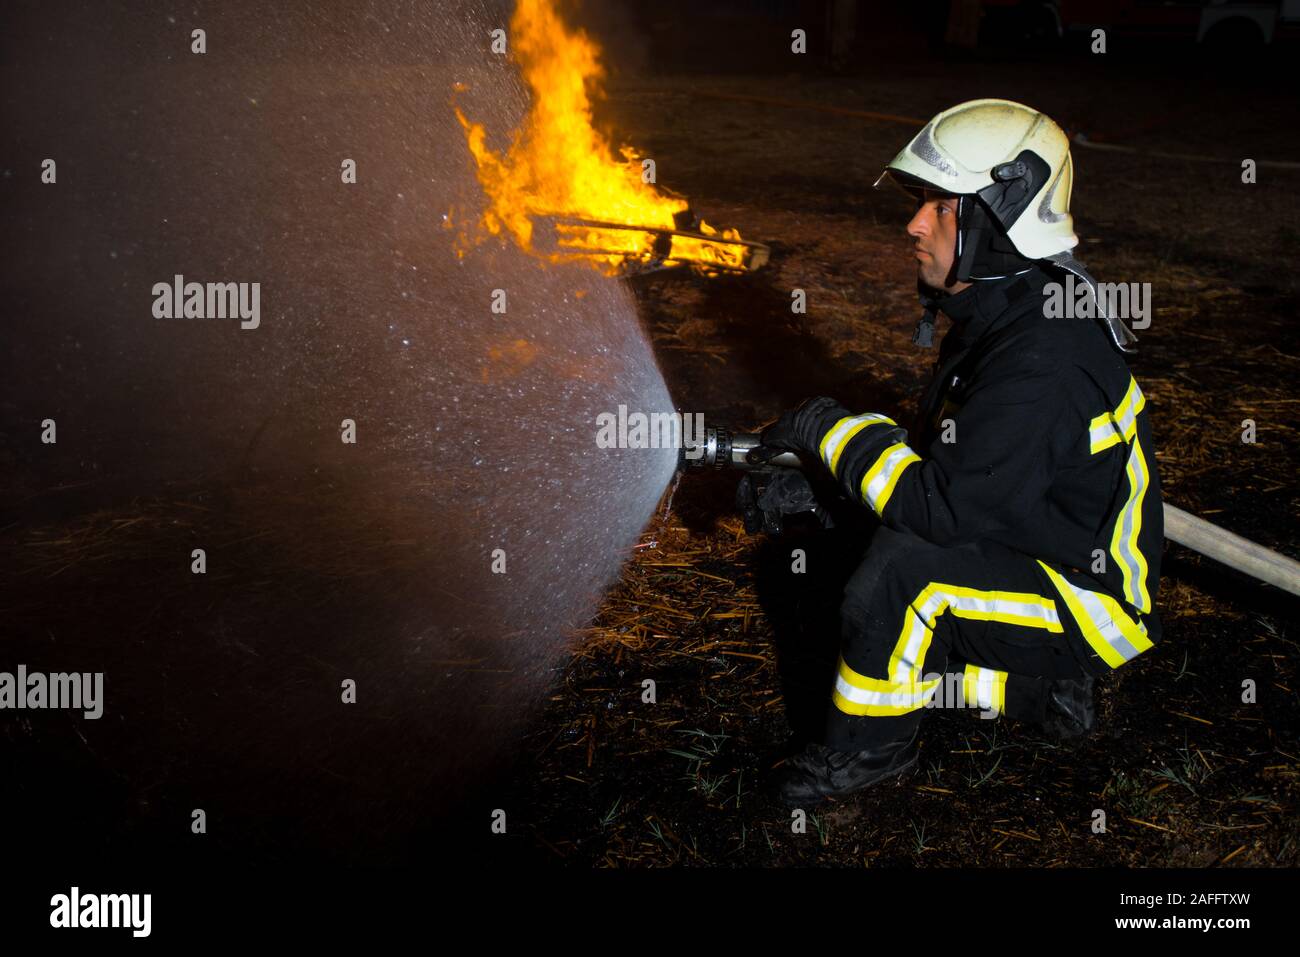 Group of firemen in protective suits putting out a fire with a water hose Stock Photo